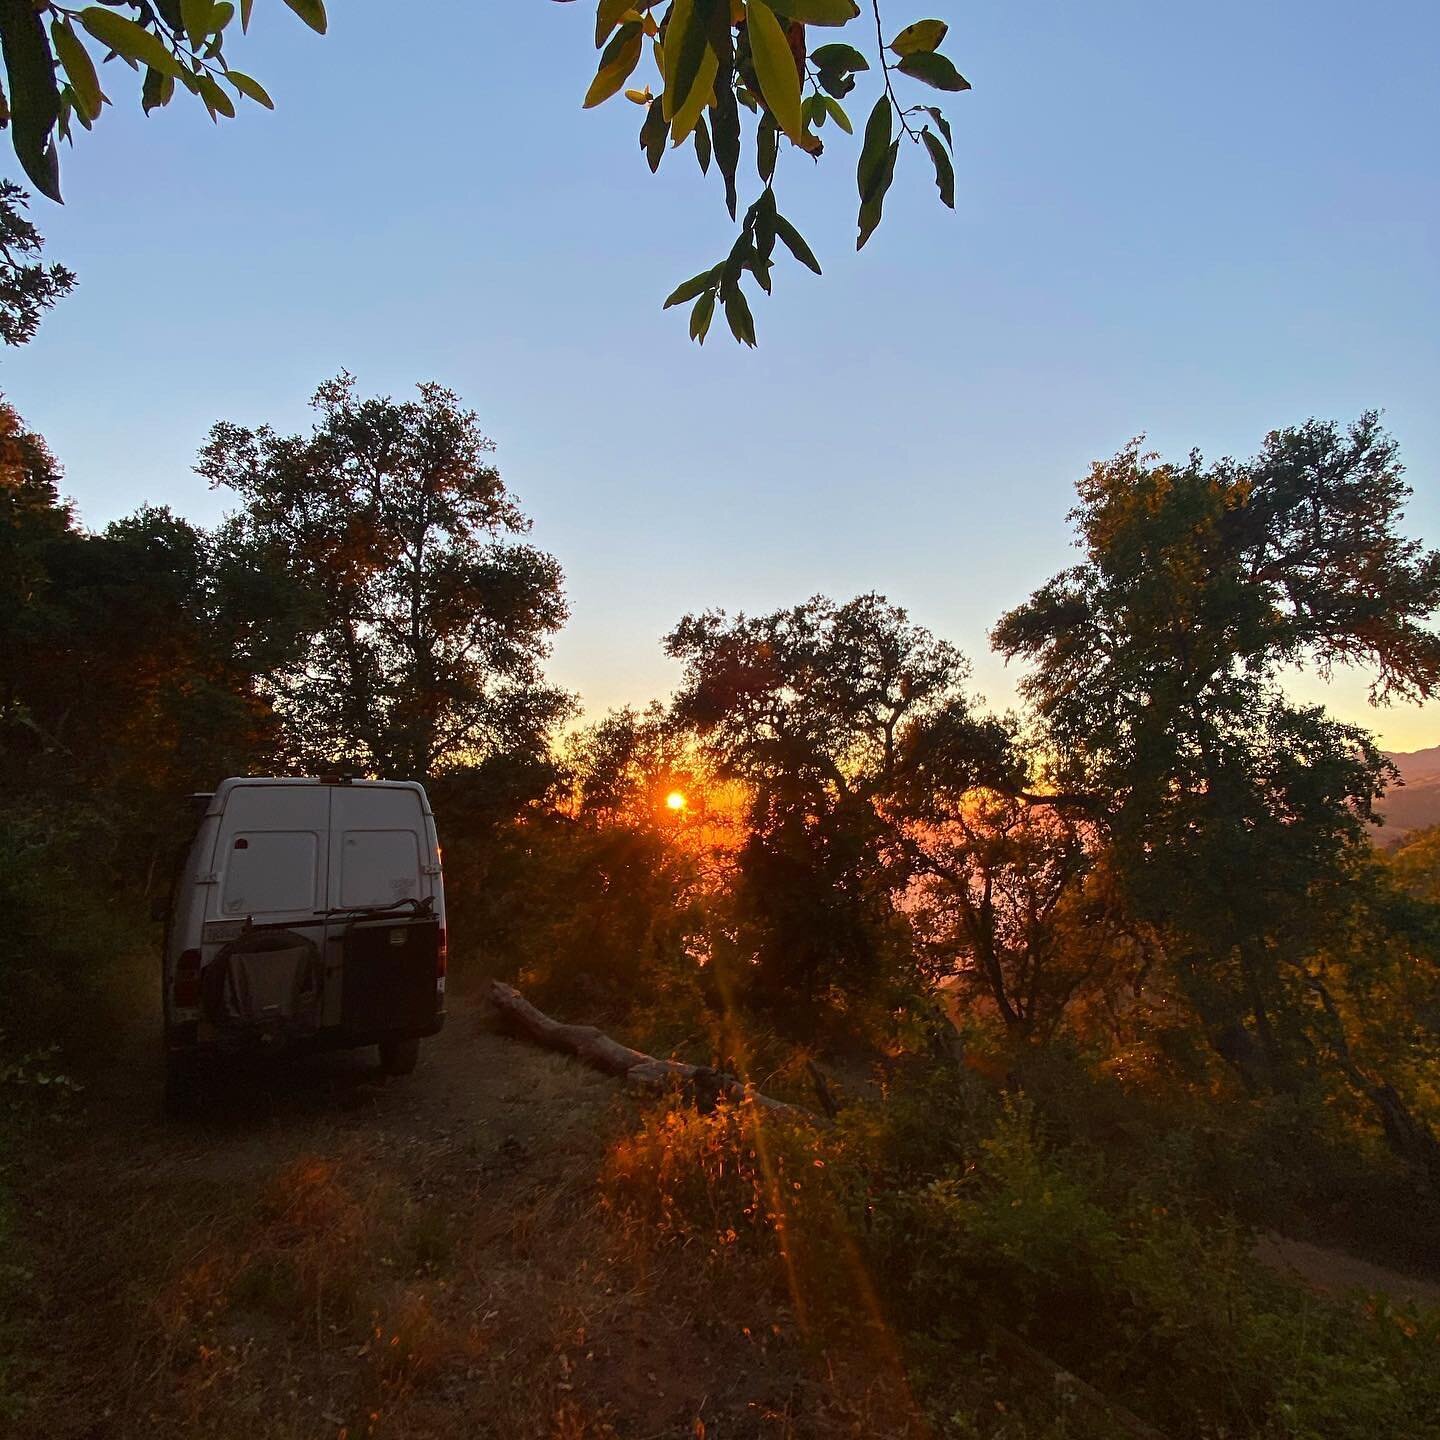 Always Chasing Sunsets In Our Simple Sprinters!🚐☀️ Way up in the hills in Big Sur, CA that most sprinters can&rsquo;t get to off-roading! #bigsur #sunset #sequoianationalpark #vanconversion #vanlife #sprinter #landscape #perspective #drone #travel #